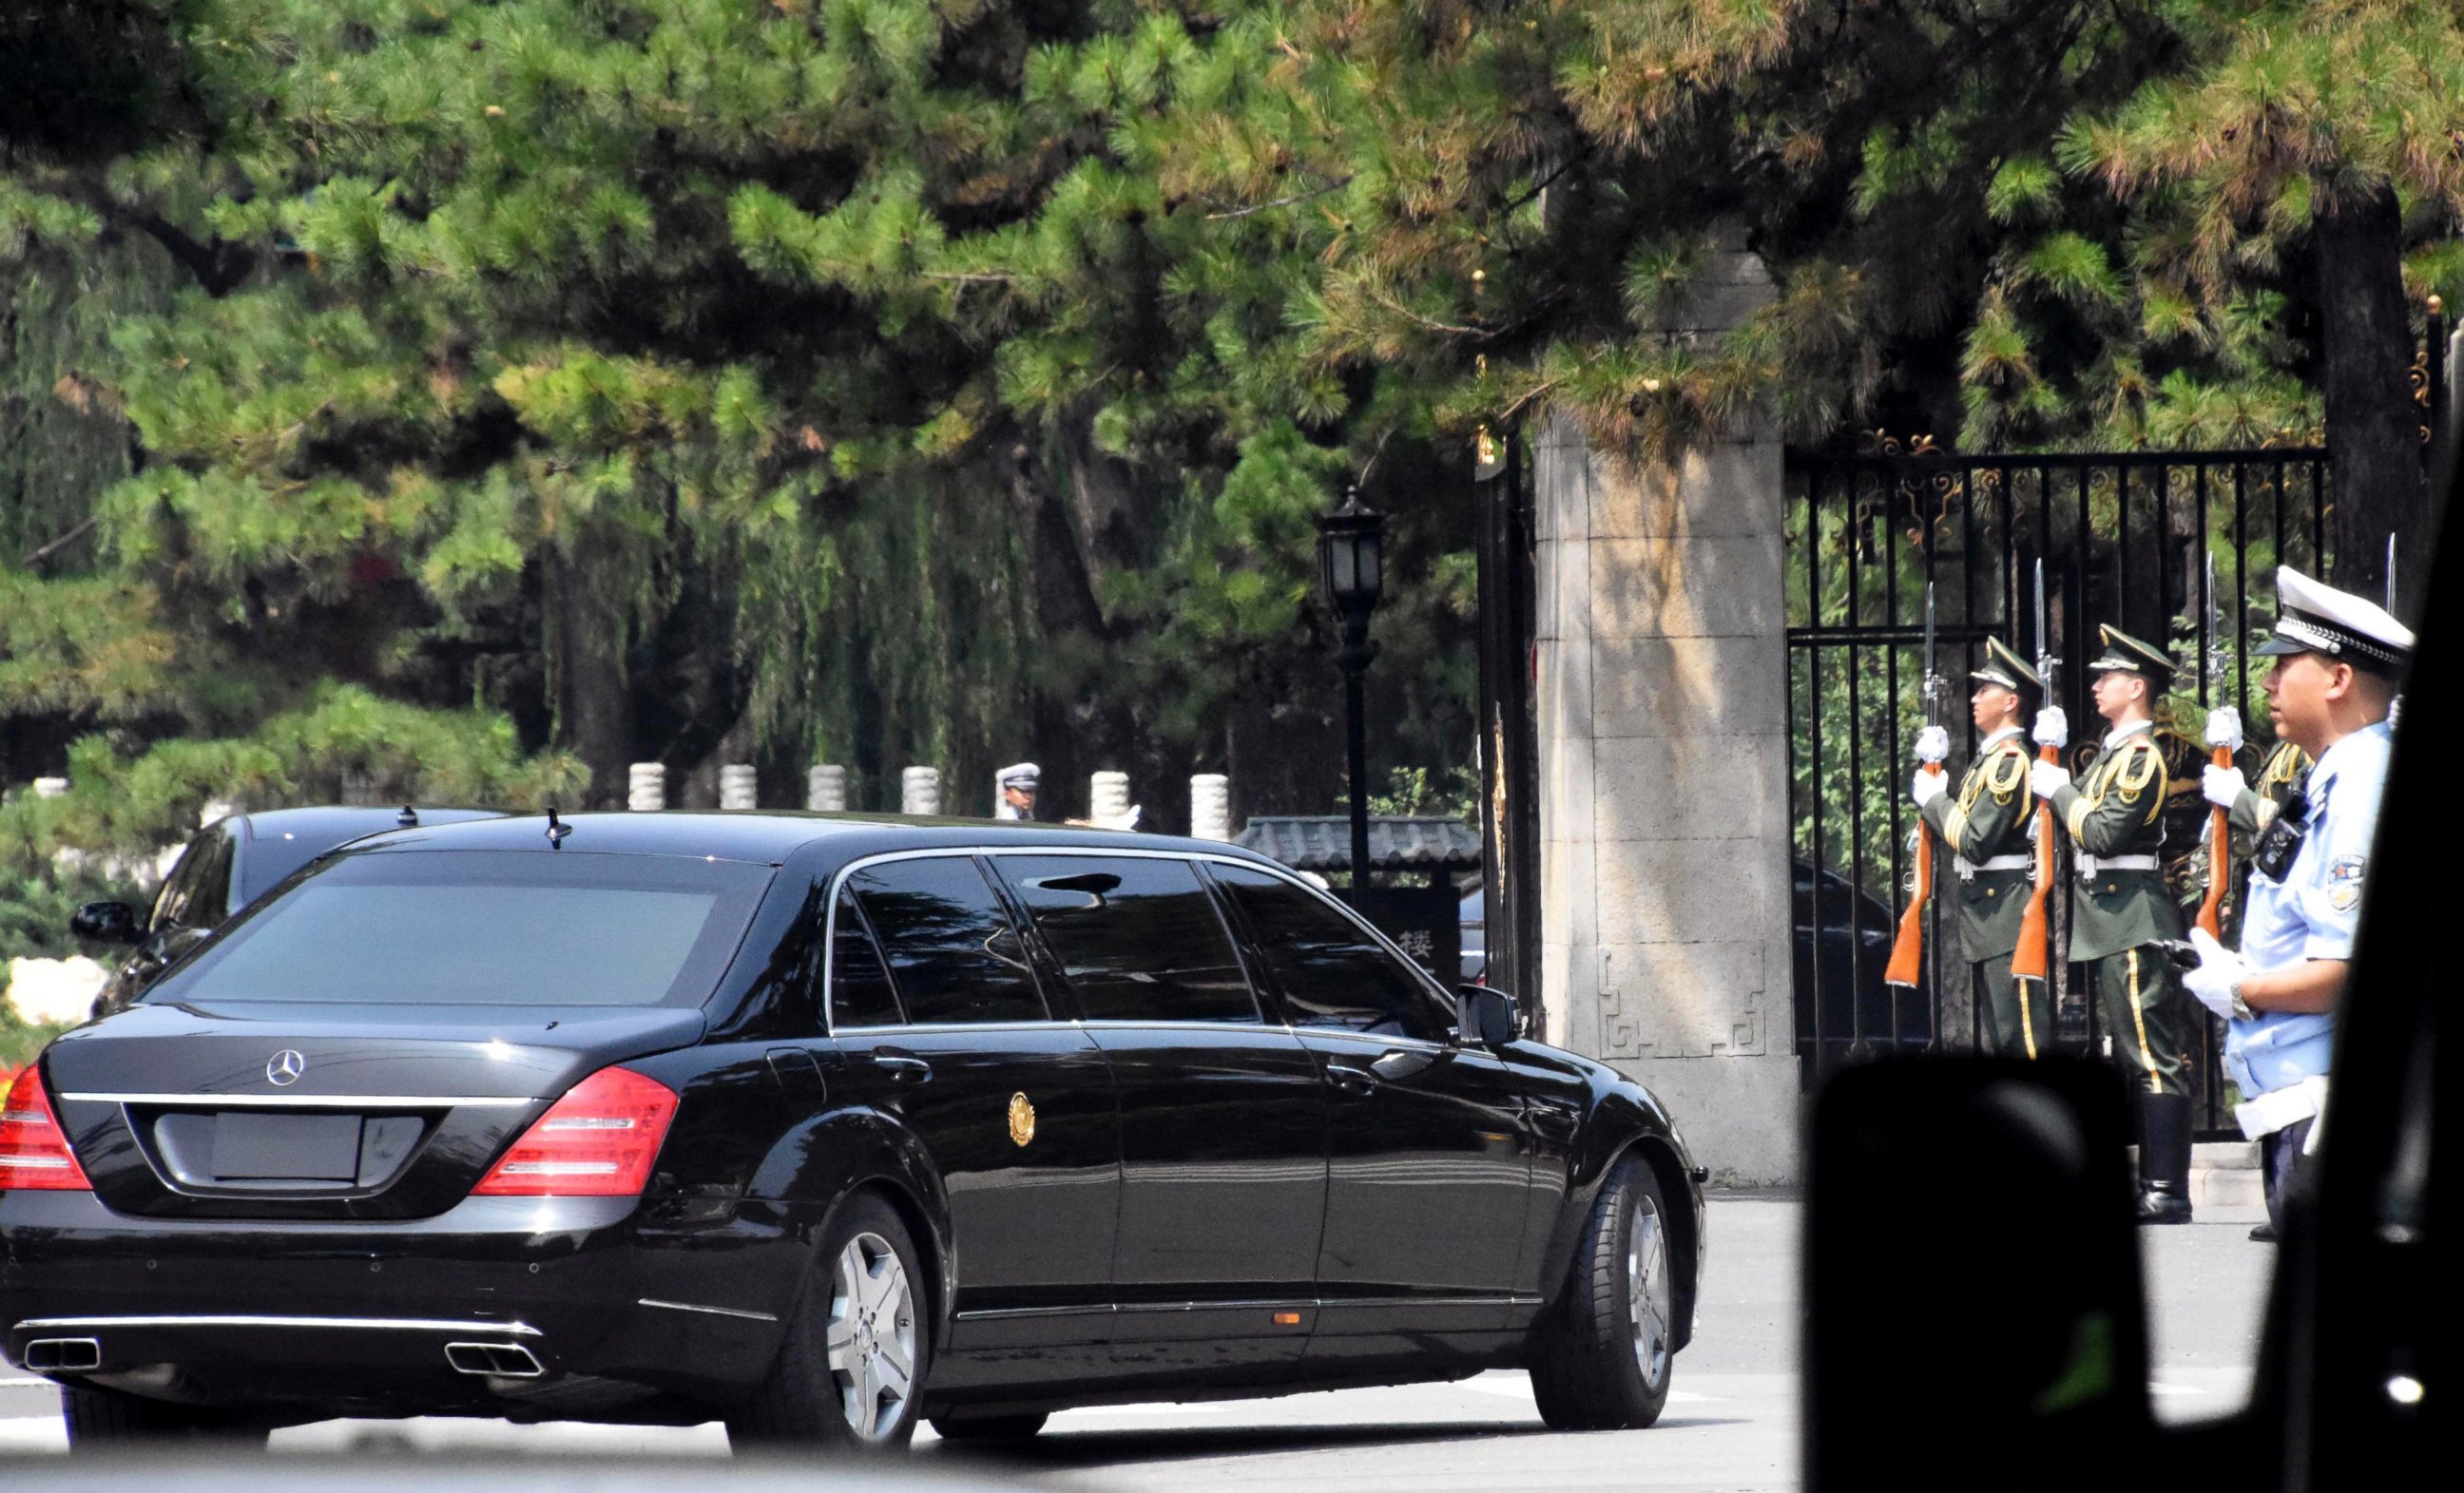 A stretch limousine with a golden emblem similar to one North Korean leader Kim Jong Un has used previously, arrives with motorcycle escorts and guard of honor salute at the Diaoyutai State Guest house in Beijing, China, Tuesday, June 19, 2018.